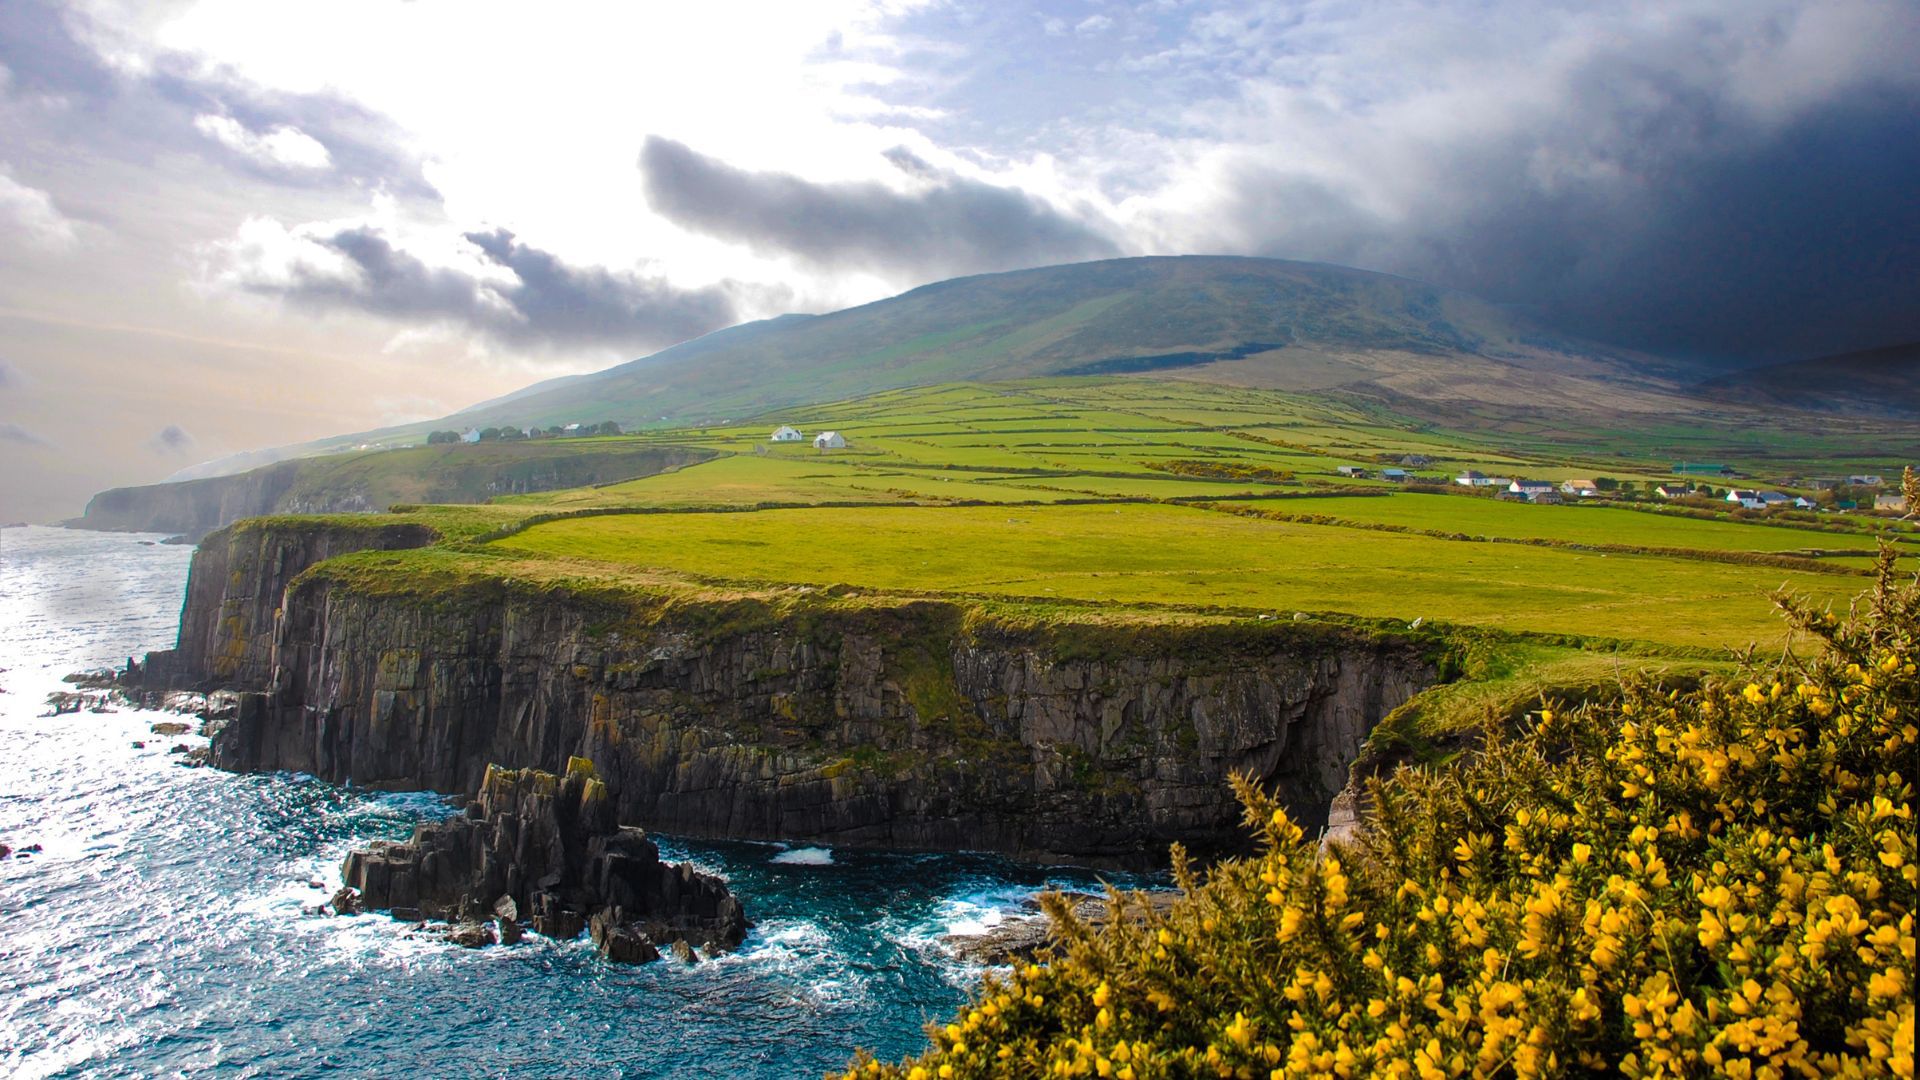 Ireland is also known as the Emerald Isle, due to the intense green color of its fields (Vaga-Mundo)